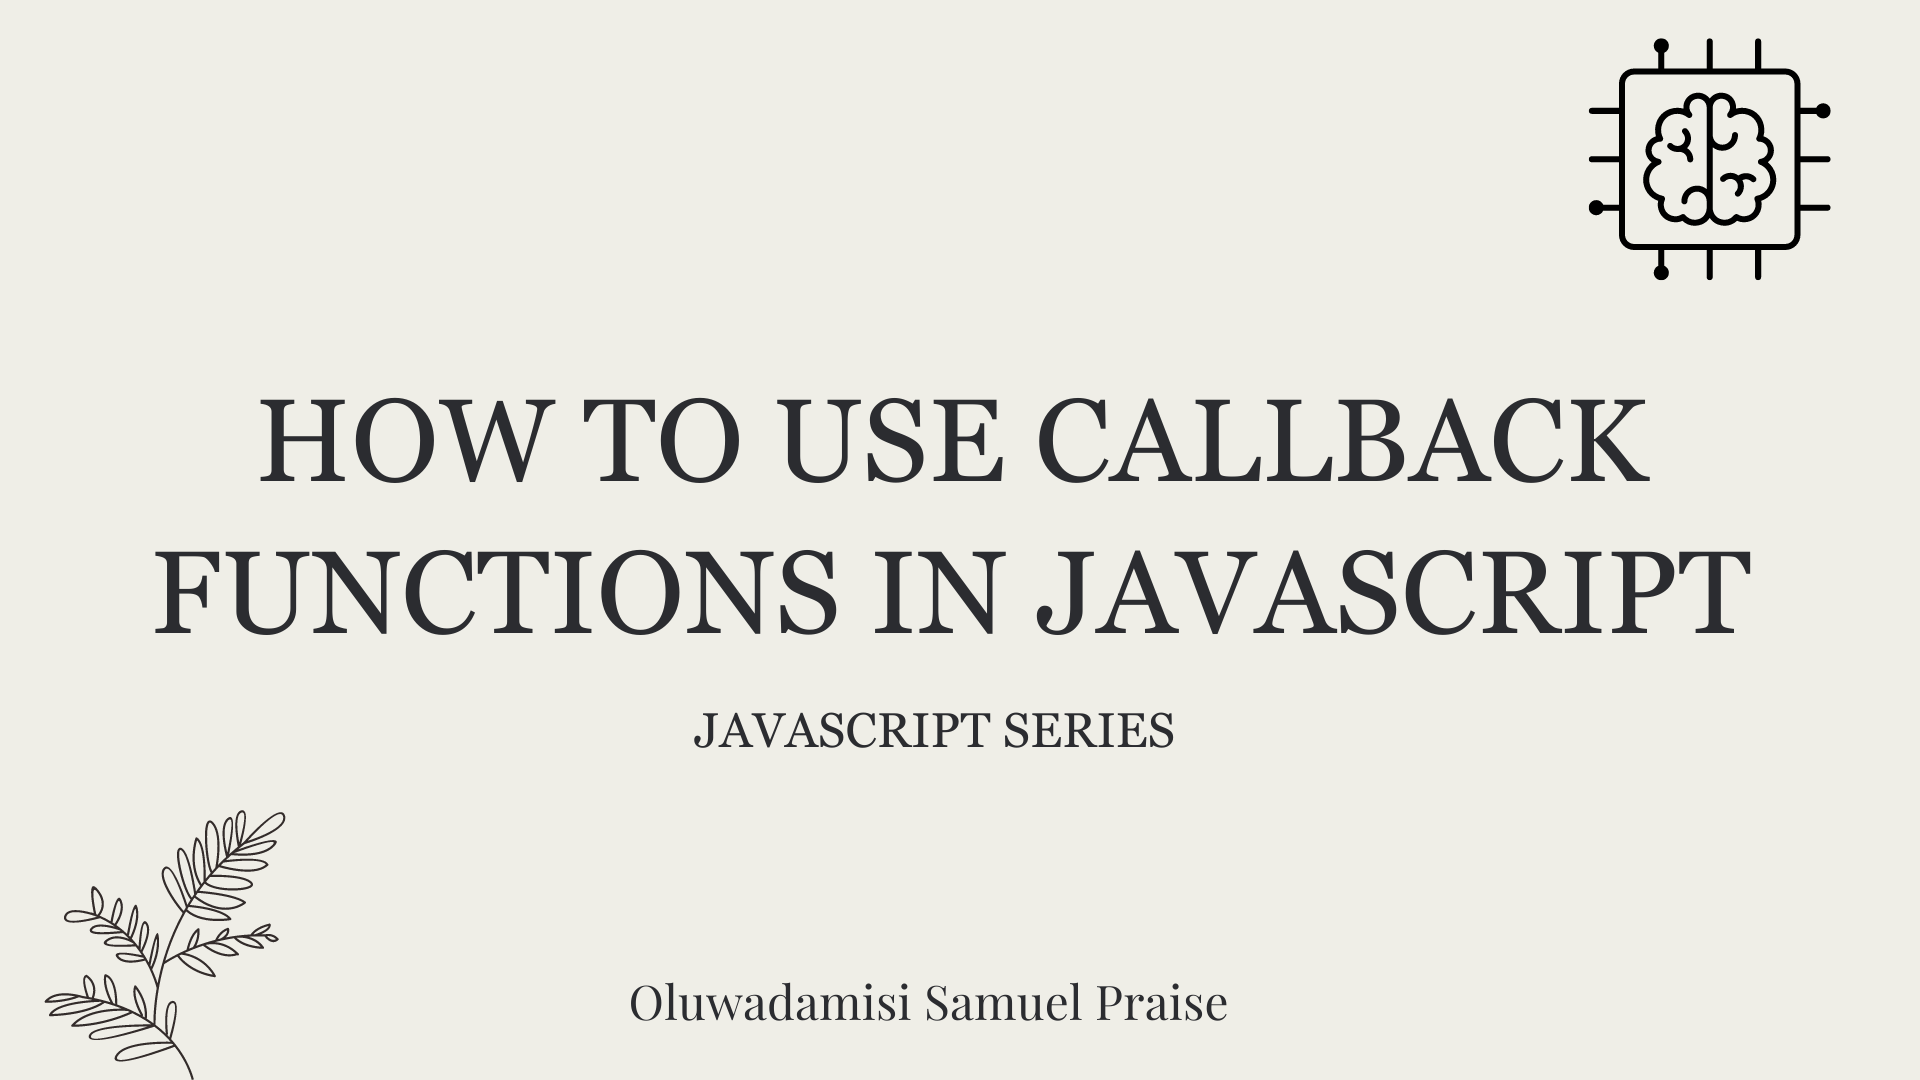 How to Use Callback Functions in JavaScript